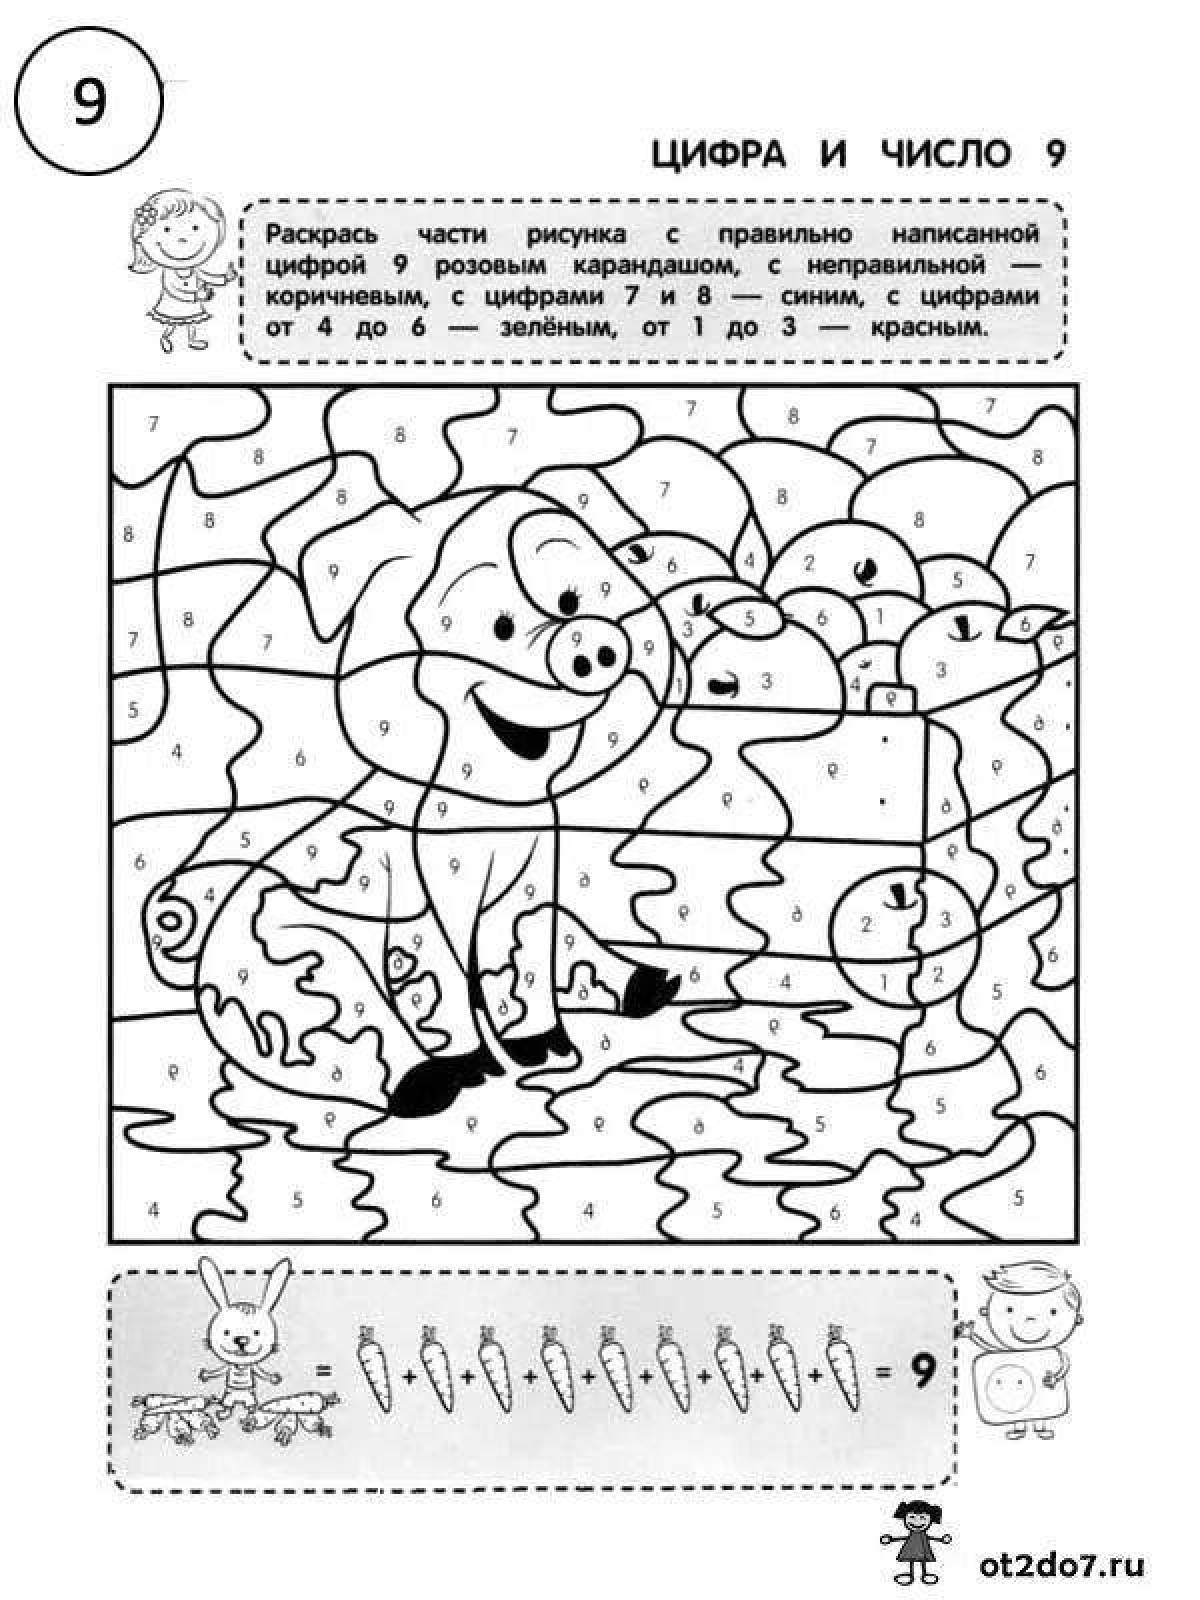 Colorful number up to 10 coloring page